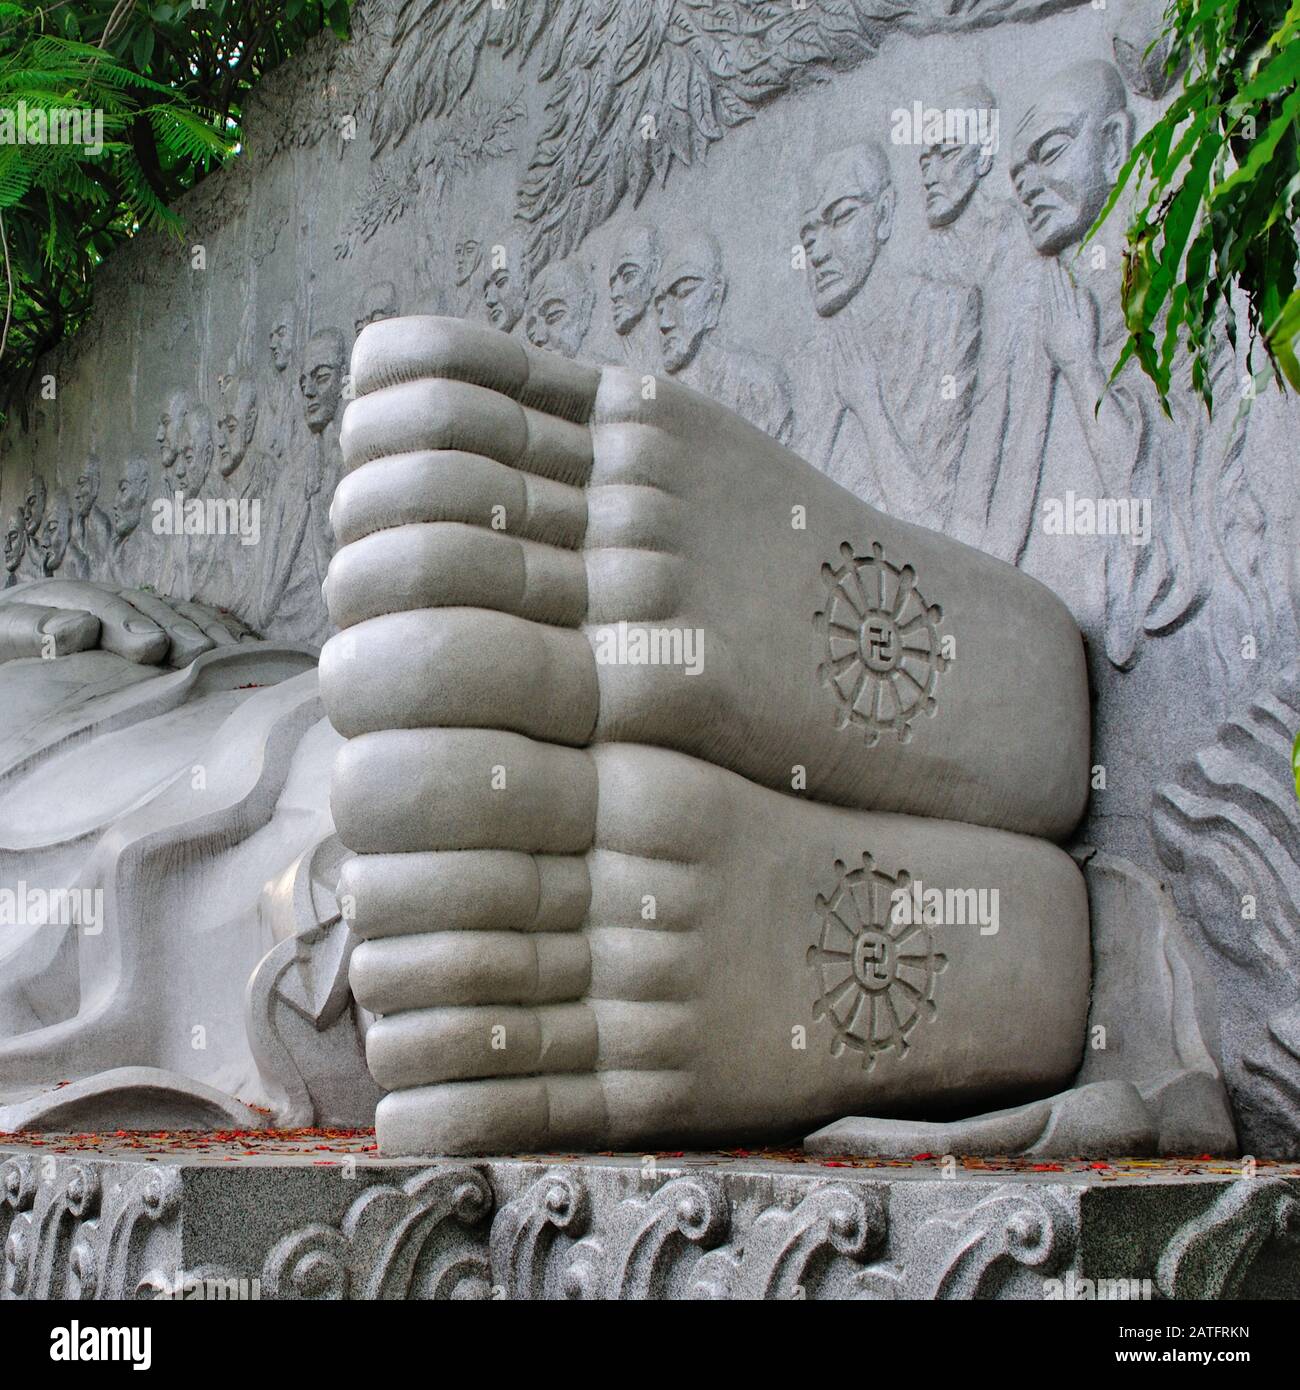 Heels of the statue of the lying Buddha at the Long Son complex, Nha Trang, Vietnam Stock Photo